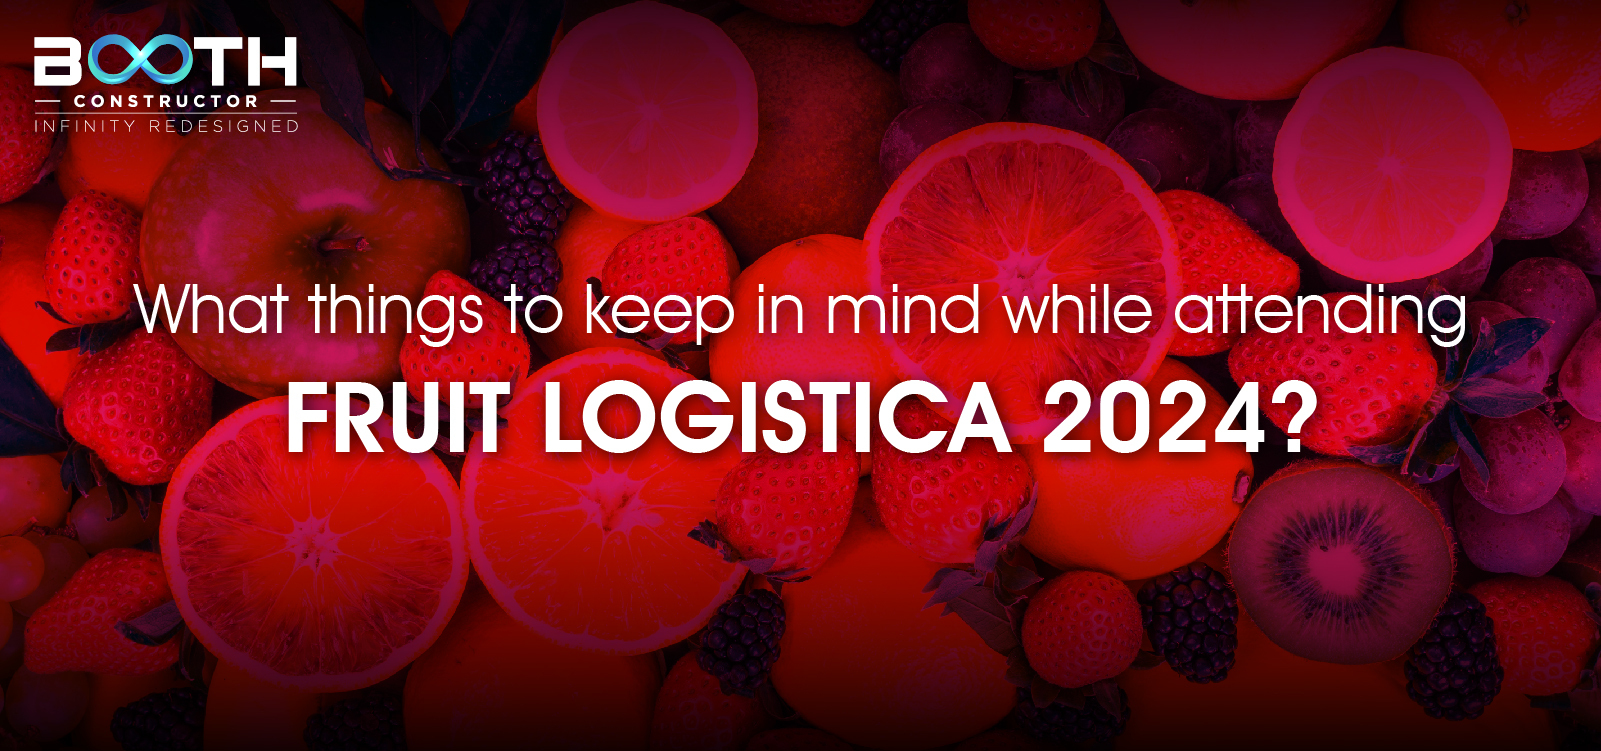 What things to keep in mind while attending Fruit Logistica 2024